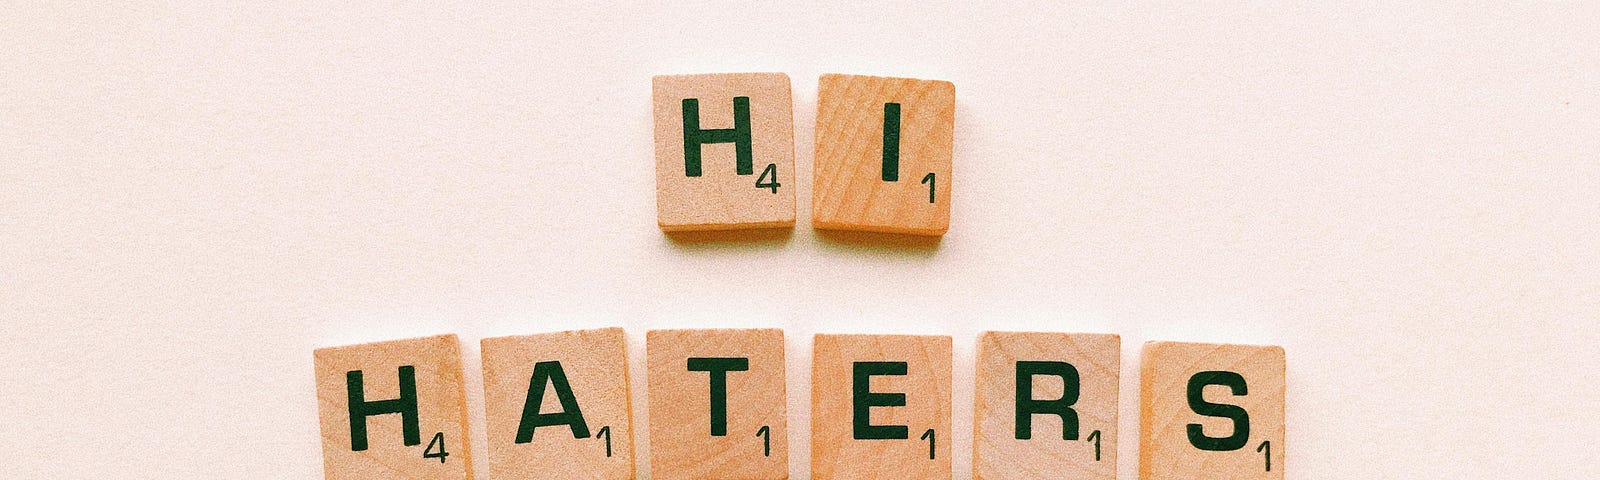 The words “Hi Haters” are spelled out using wooden Scrabble board game pieces.